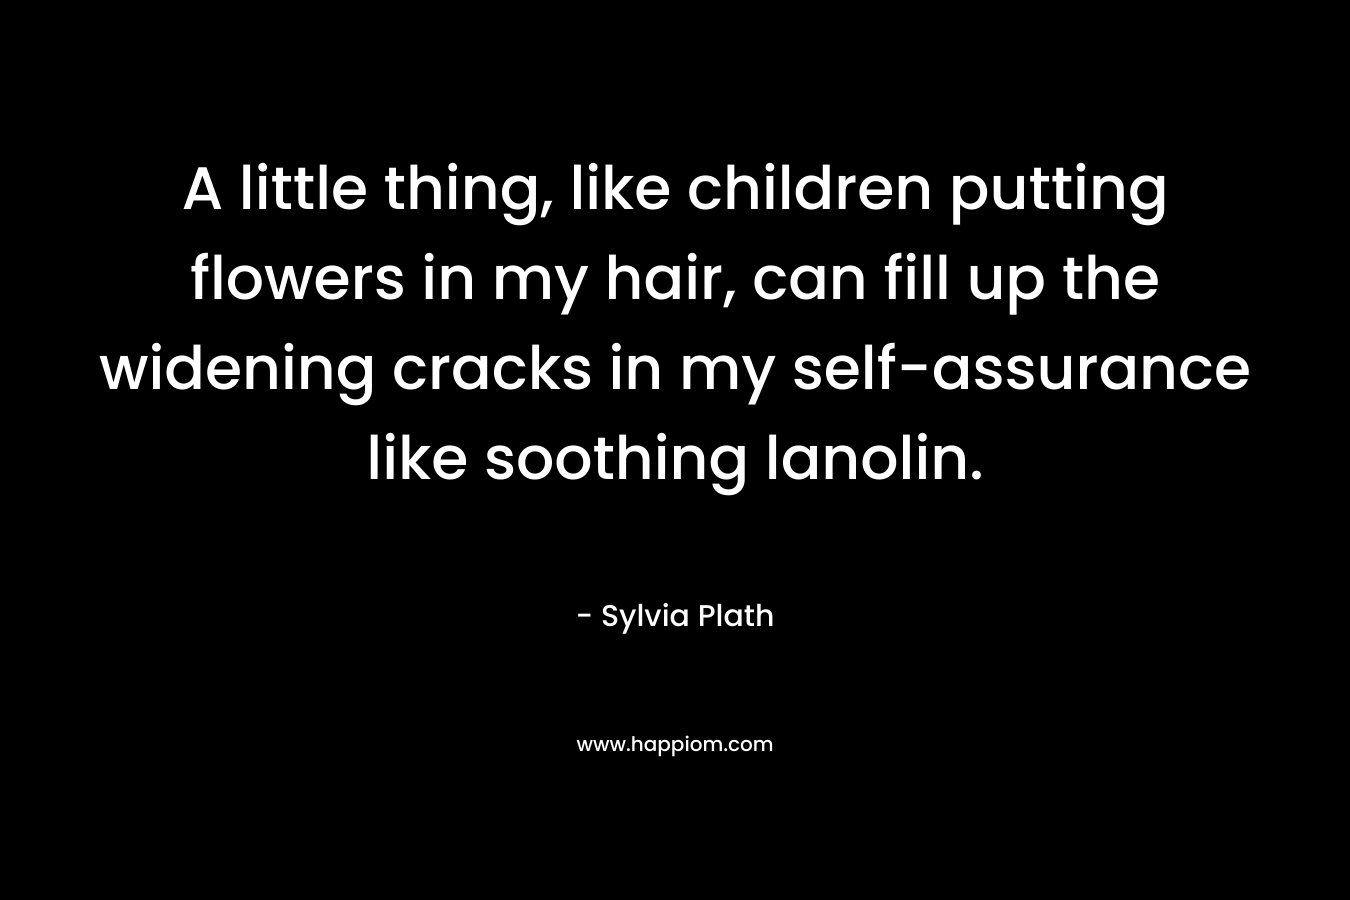 A little thing, like children putting flowers in my hair, can fill up the widening cracks in my self-assurance like soothing lanolin. – Sylvia Plath